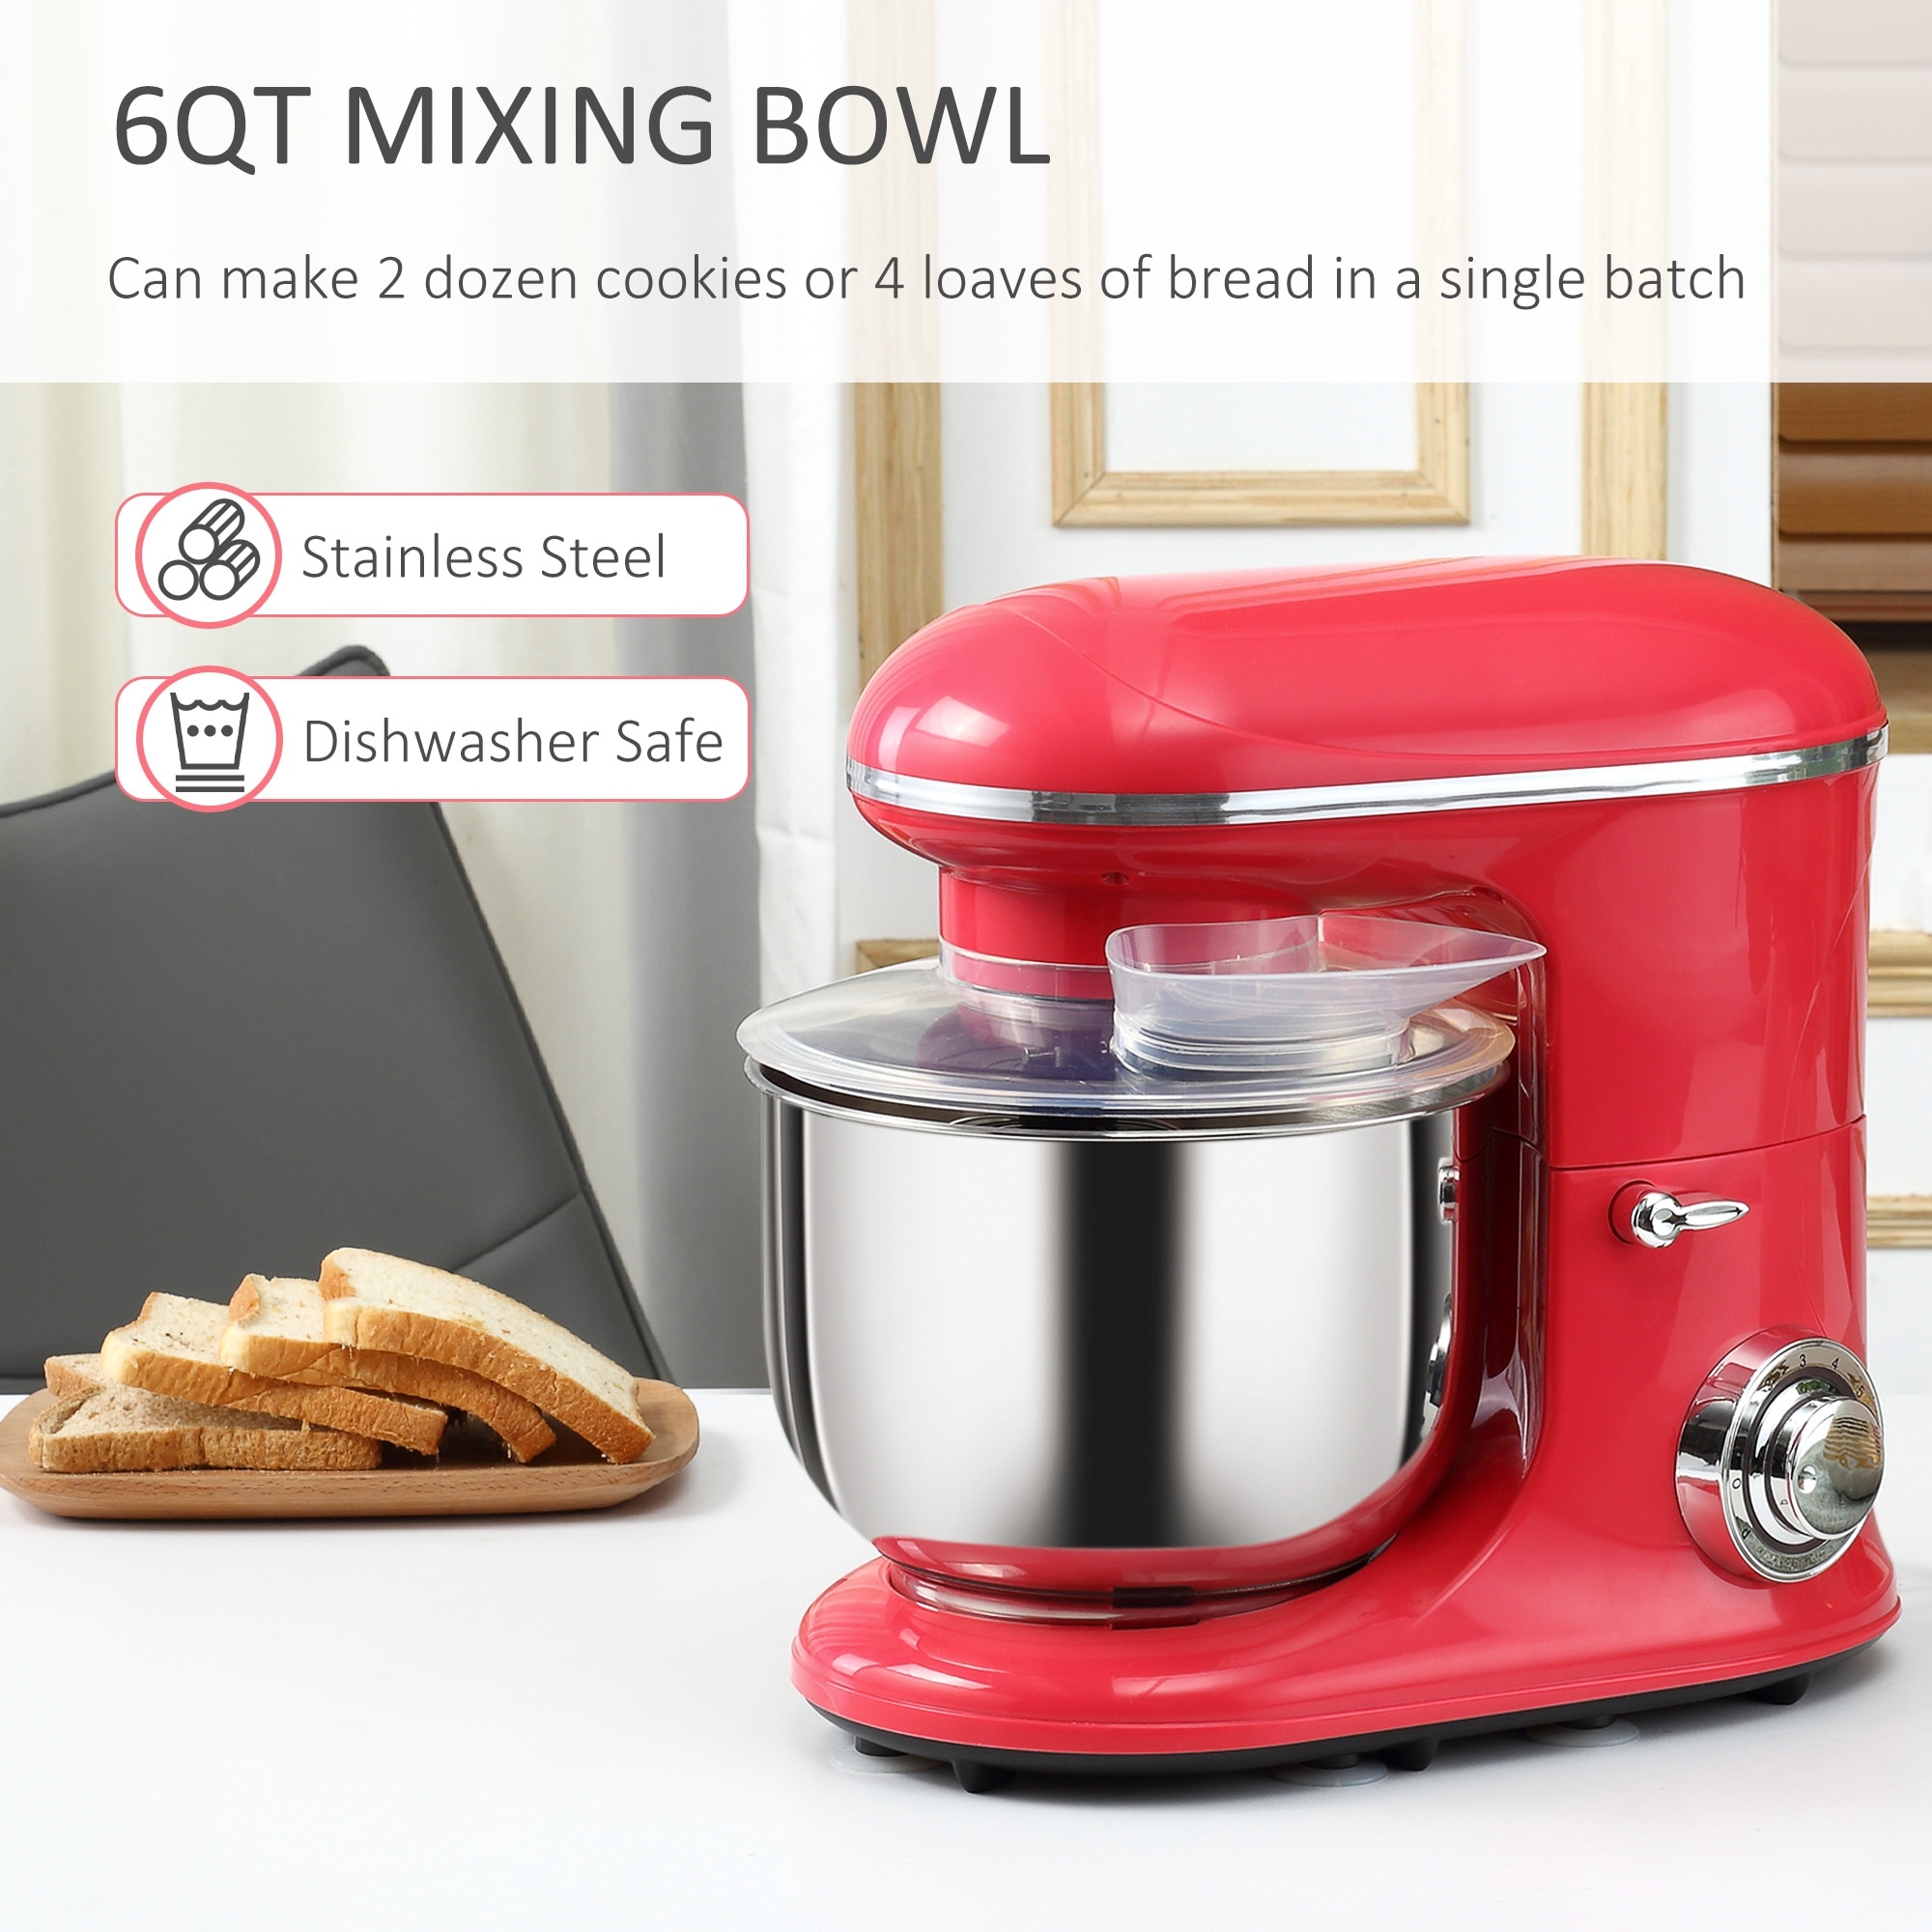 https://ak1.ostkcdn.com/images/products/is/images/direct/99ba961658cc419e70b010688dfa69b9a329269d/HOMCOM-Stand-Mixer-with-6%2B1P-Speed%2C-600W-Tilt-Head-Kitchen-Electric-Mixer-with-6-Qt-Stainless-Steel-Mixing-Bowl.jpg